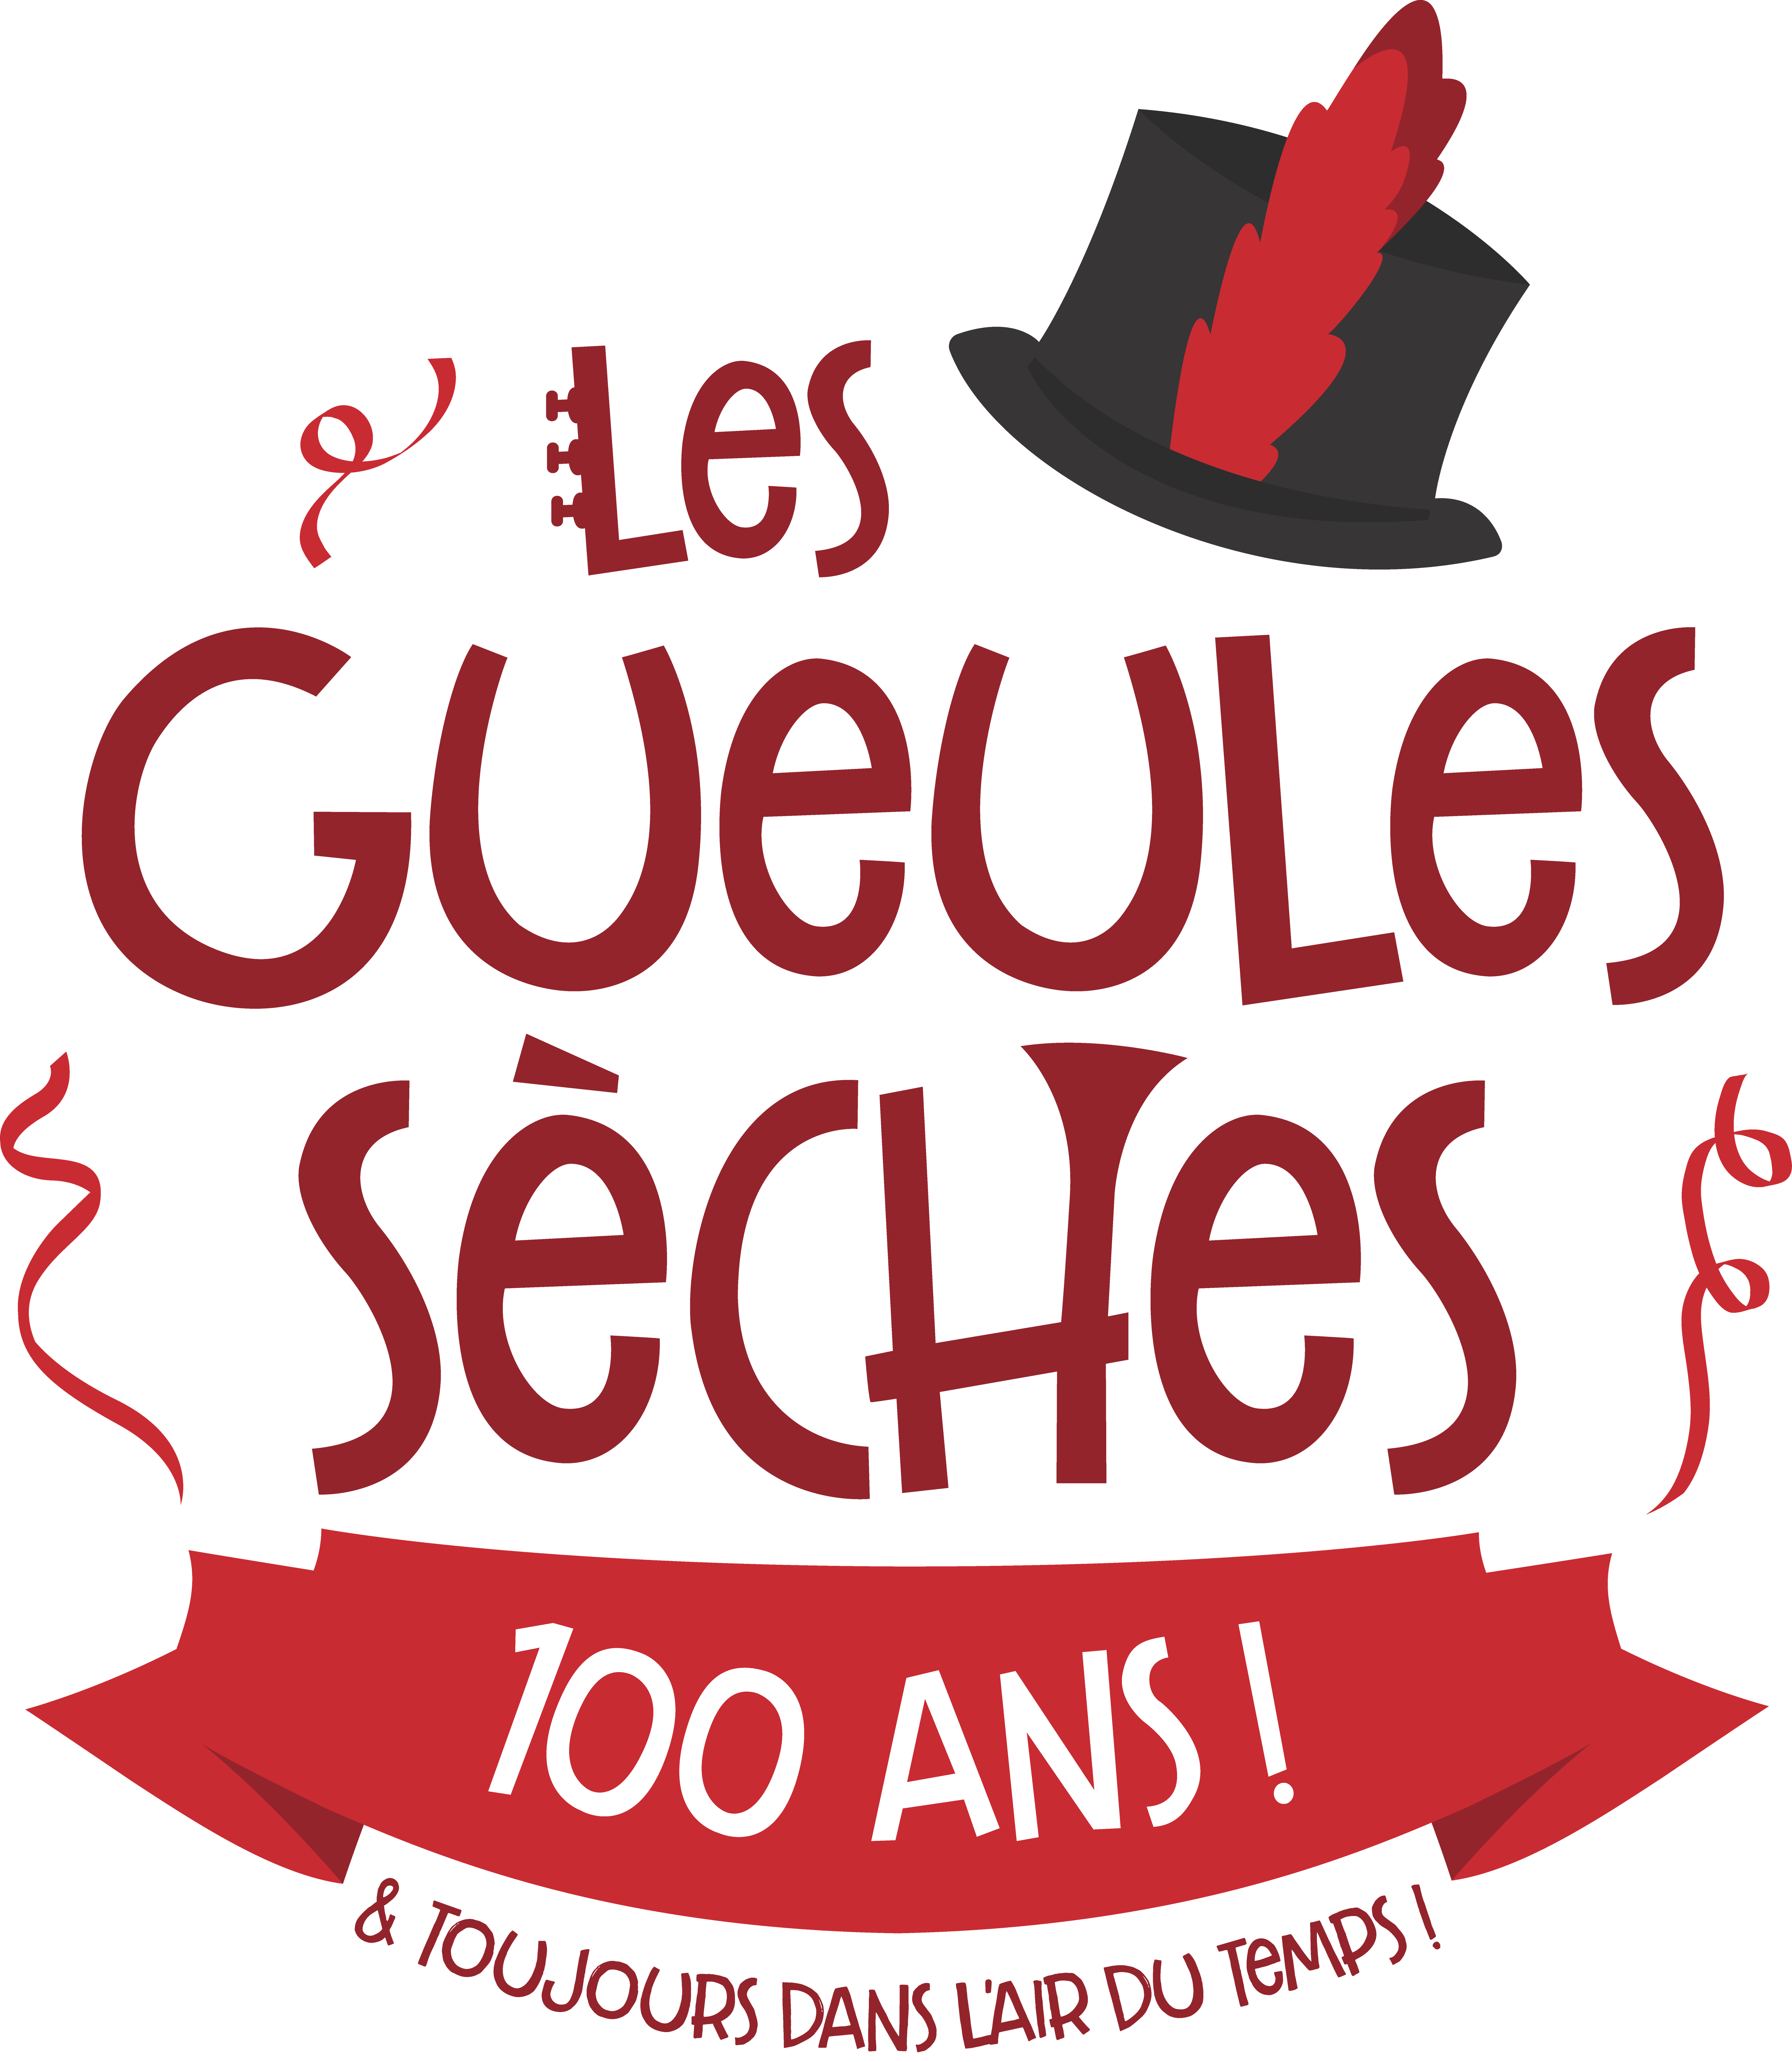 logotype-100-ans-les-gueules-seches-identite-marque-univers-reference